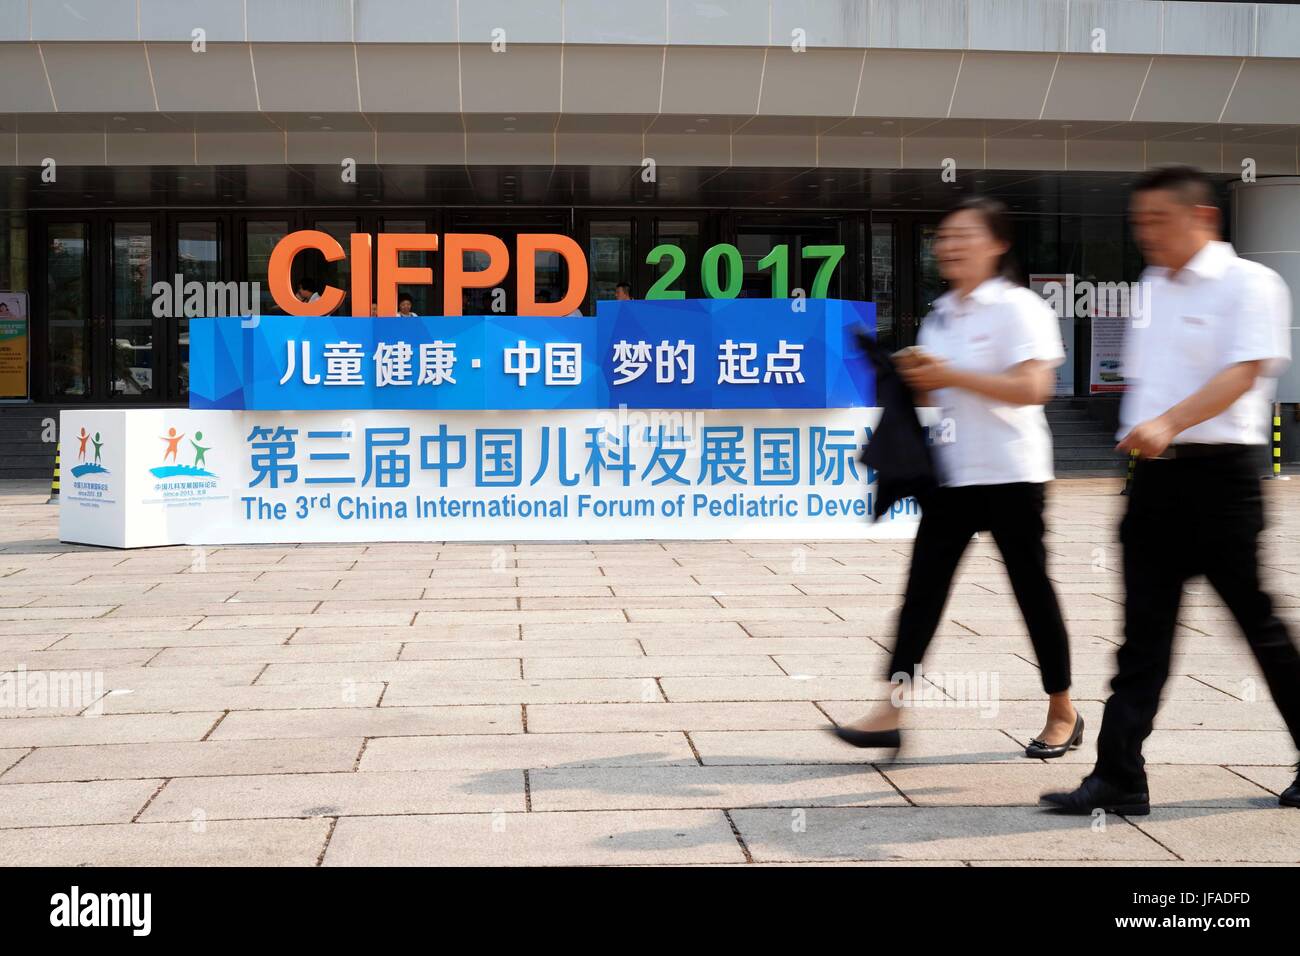 Beijing, China. 30th June, 2017. People walk past a signboard of the 3rd China International Forum of Pediatric Development (CIFPD) in Beijing, capital of China, June 30, 2017. The every-two-year CIFPD, under the theme 'Children's Health, the Starting Point of the Chinese Dream', is devoted to advancing international pediatric development, exchanges and collaborations. This year's CIFPD lasts from June 30 to July 2. Credit: Zhang Yuwei/Xinhua/Alamy Live News Stock Photo